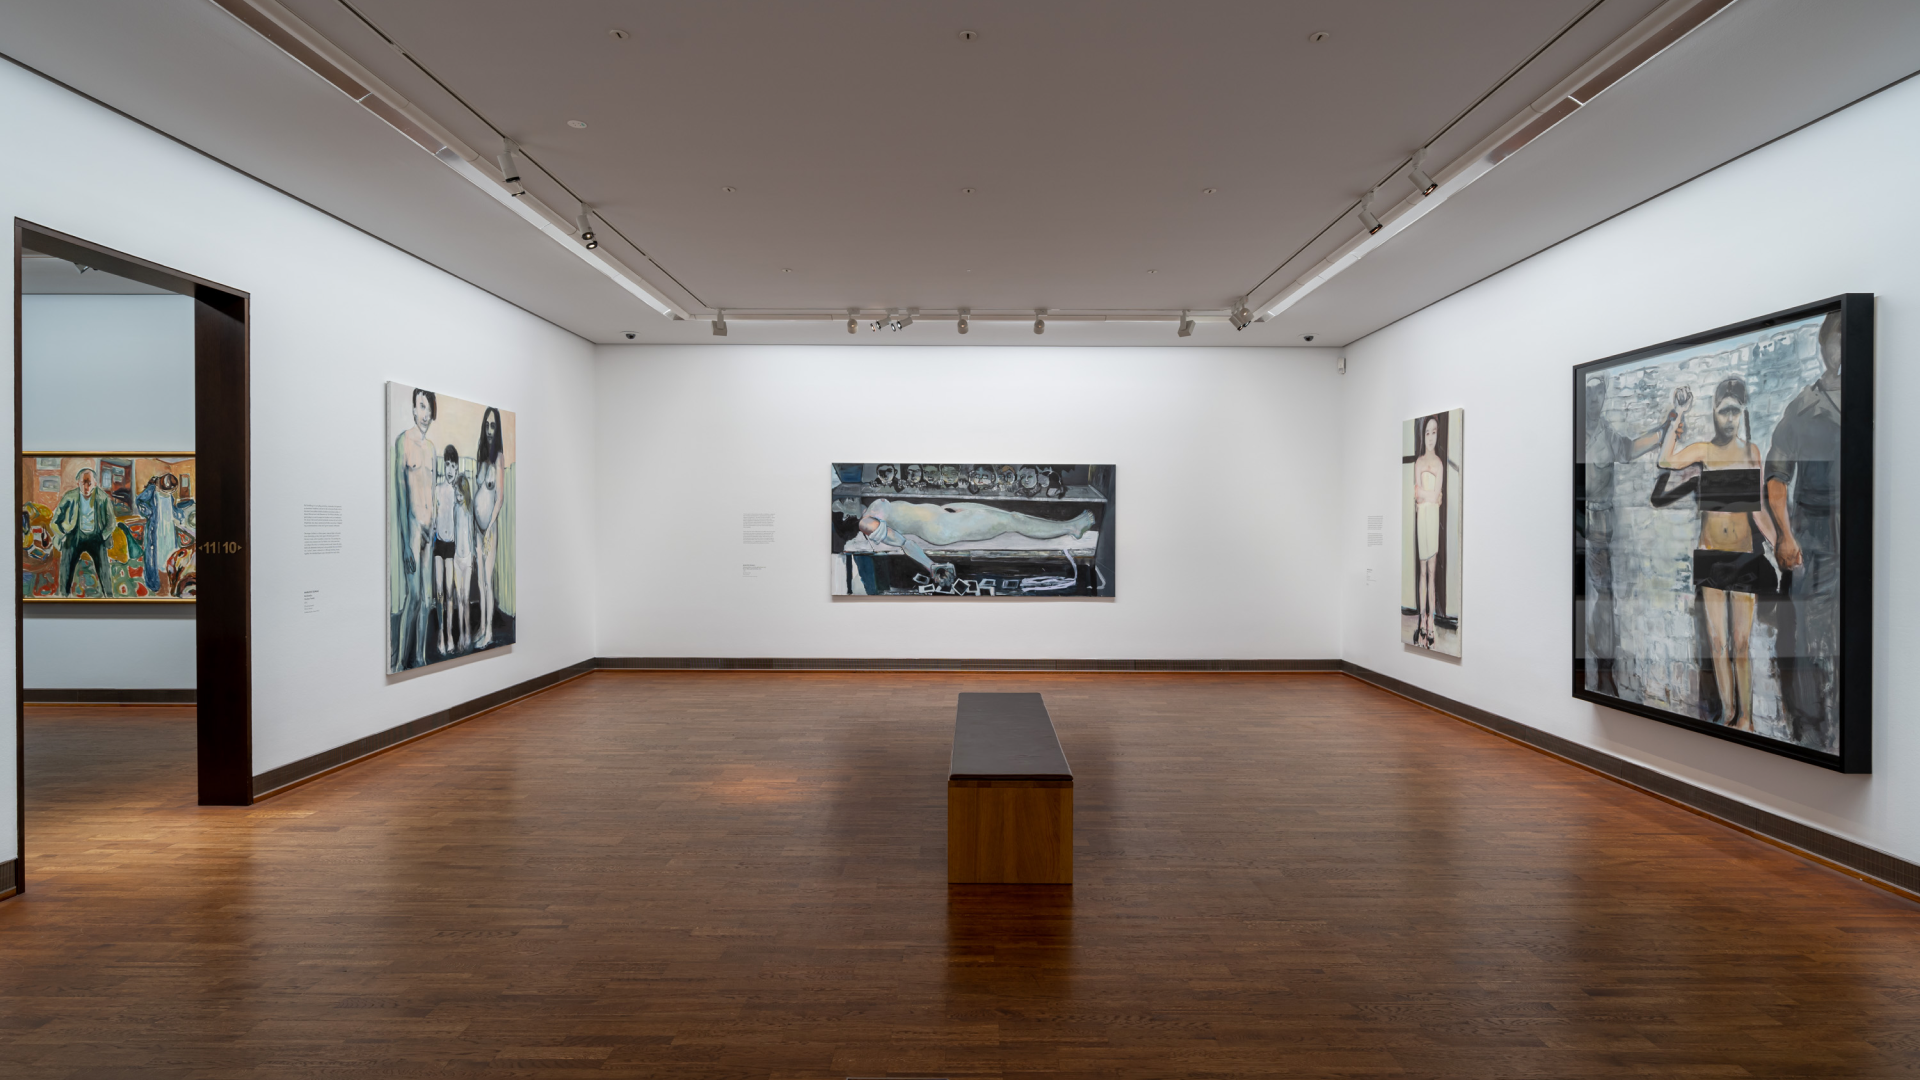 Installation view of the exhibition, Edvard Munch. In Dialogue, at the ALBERTINA Museum in Vienna, dated 2022.